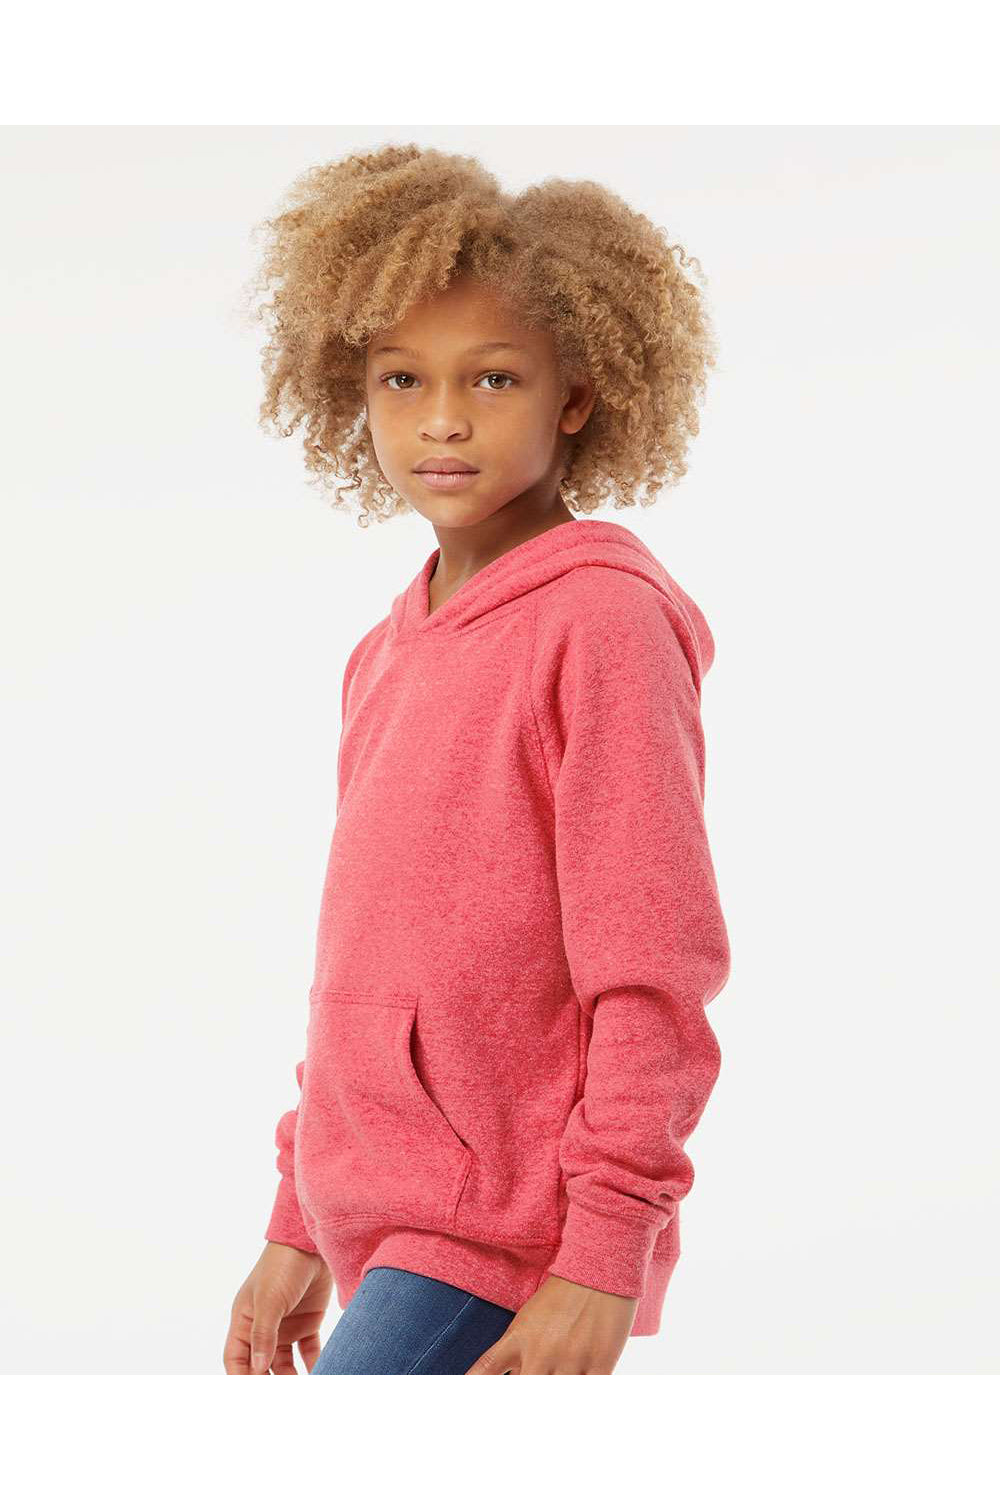 Independent Trading Co. PRM15YSB Youth Special Blend Raglan Hooded Sweatshirt Hoodie Pomegranate Model Side